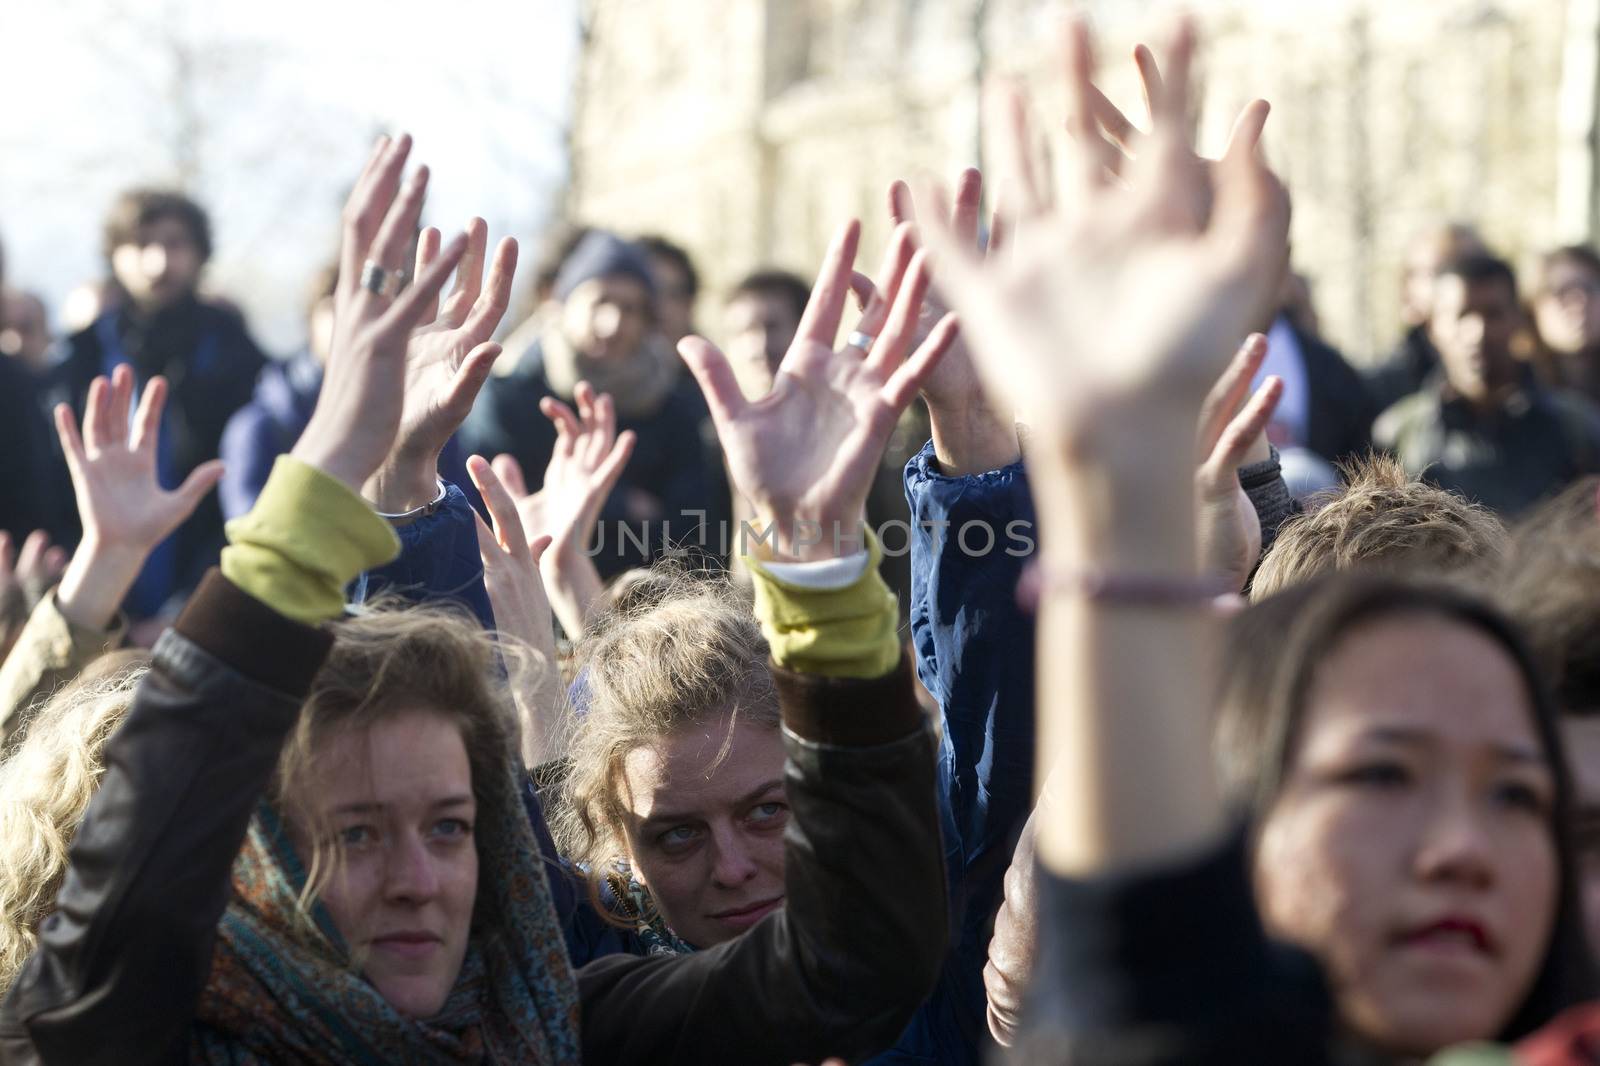 FRANCE, Paris: Hundreds of protesters gather on the Place de La Republique in Paris as part of demonstrations by the Nuit Debout (Up All Night) movement, on April 11, 2016. French Prime Minister Manuel Valls unveiled measures to help young people find work, aiming to quell weeks of protests against the government's proposed reforms to labour laws. Young people have been at the forefront of mass demonstrations against the reforms over the past month, which the government argues are aimed at making France's rigid labour market more flexible.